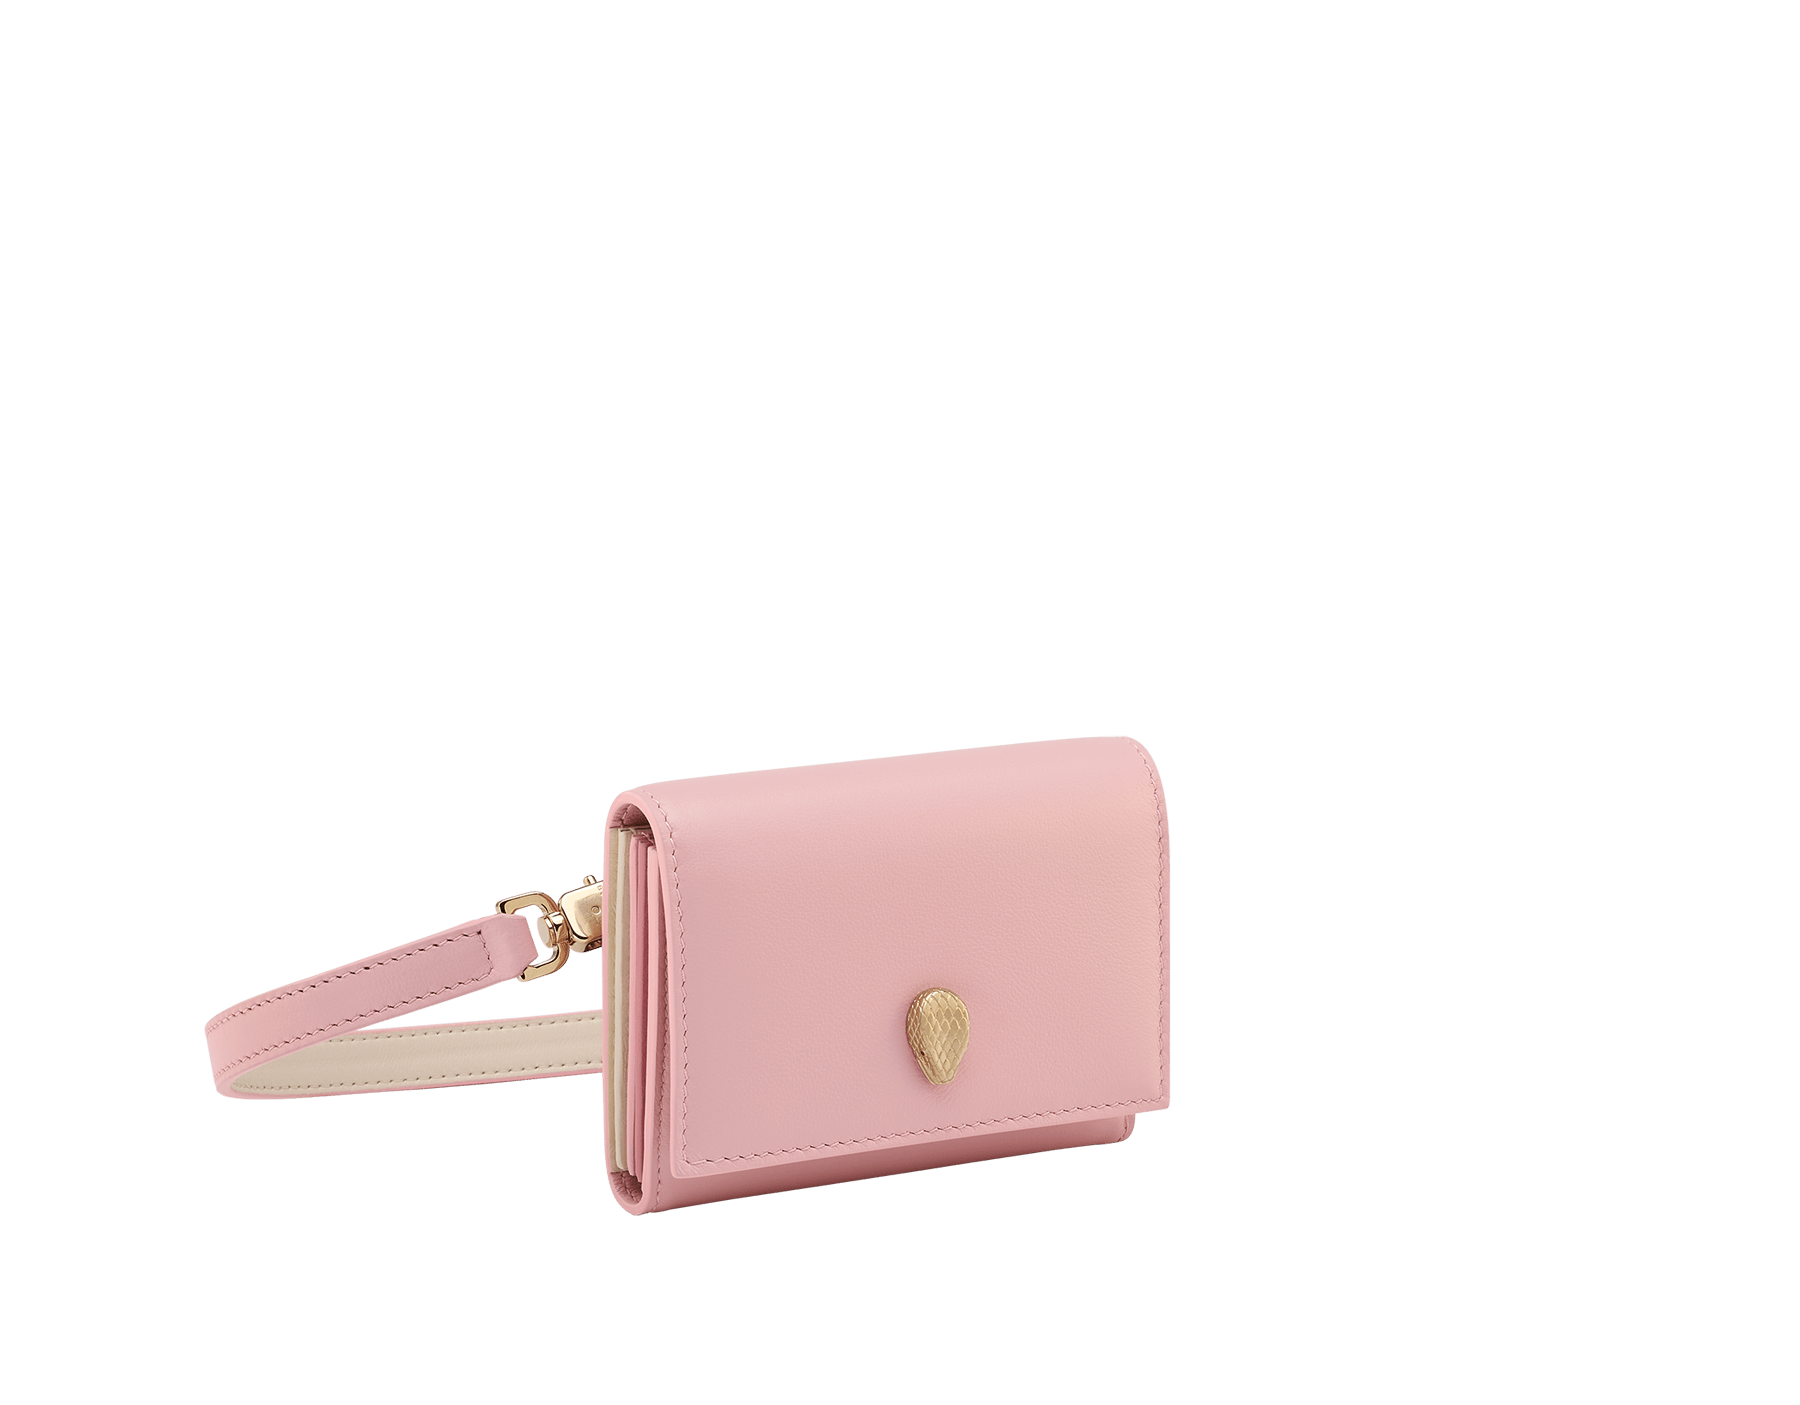 Serpenti Forever crossbody card holder in primrose quartz pink Metropolitan calf leather with flamingo quartz pink, primrose quartz pink and ivory opal nappa leather side details, and black moiré lining. Captivating magnetic snakehead closure in light gold-plated brass embellished with red enamel eyes. 292837 image 1